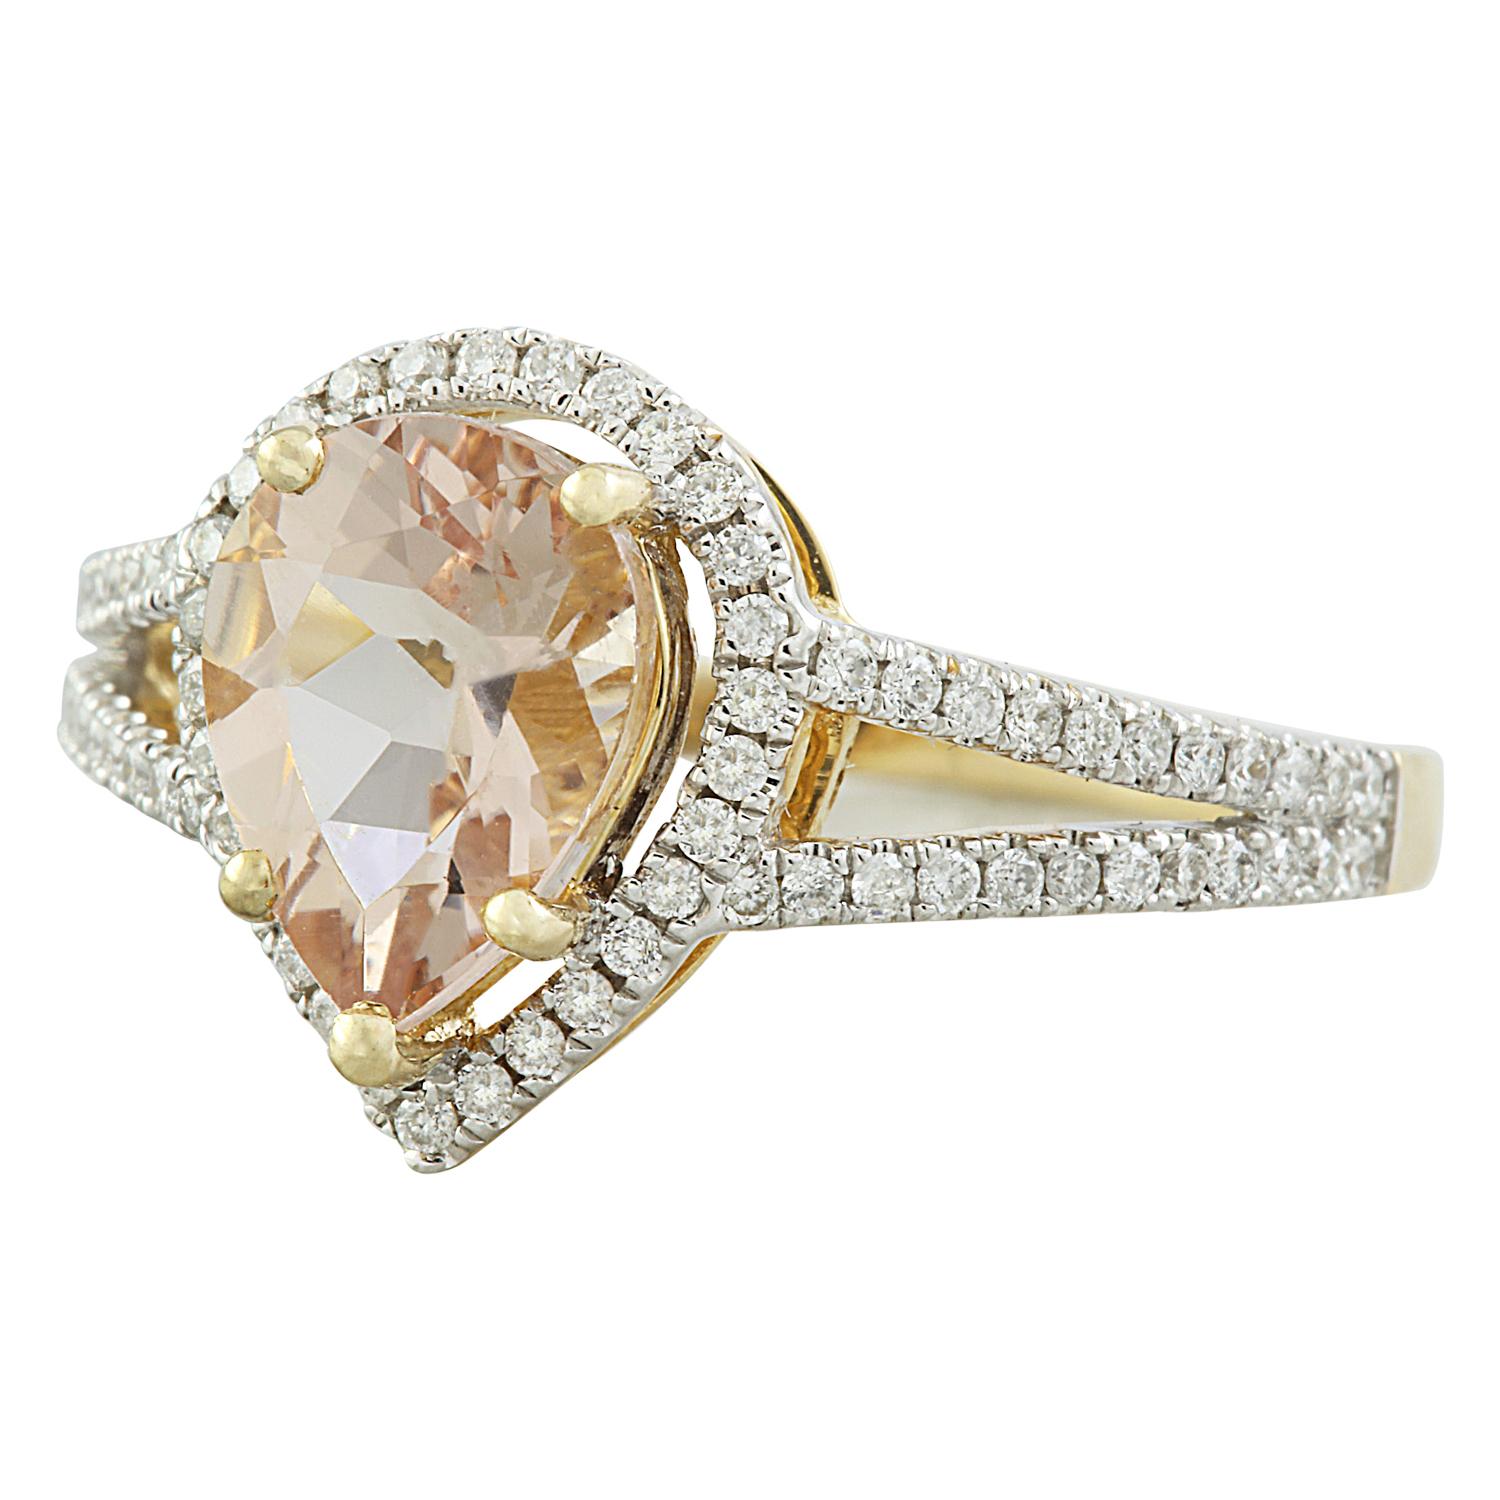 Introducing our elegant 2.32 Carat Natural Morganite Ring, meticulously crafted in radiant 14 Karat Solid Yellow Gold. Authenticated with a stamped mark of 14K, this exquisite ring weighs a total of 2.6 grams, promising both style and durability. At